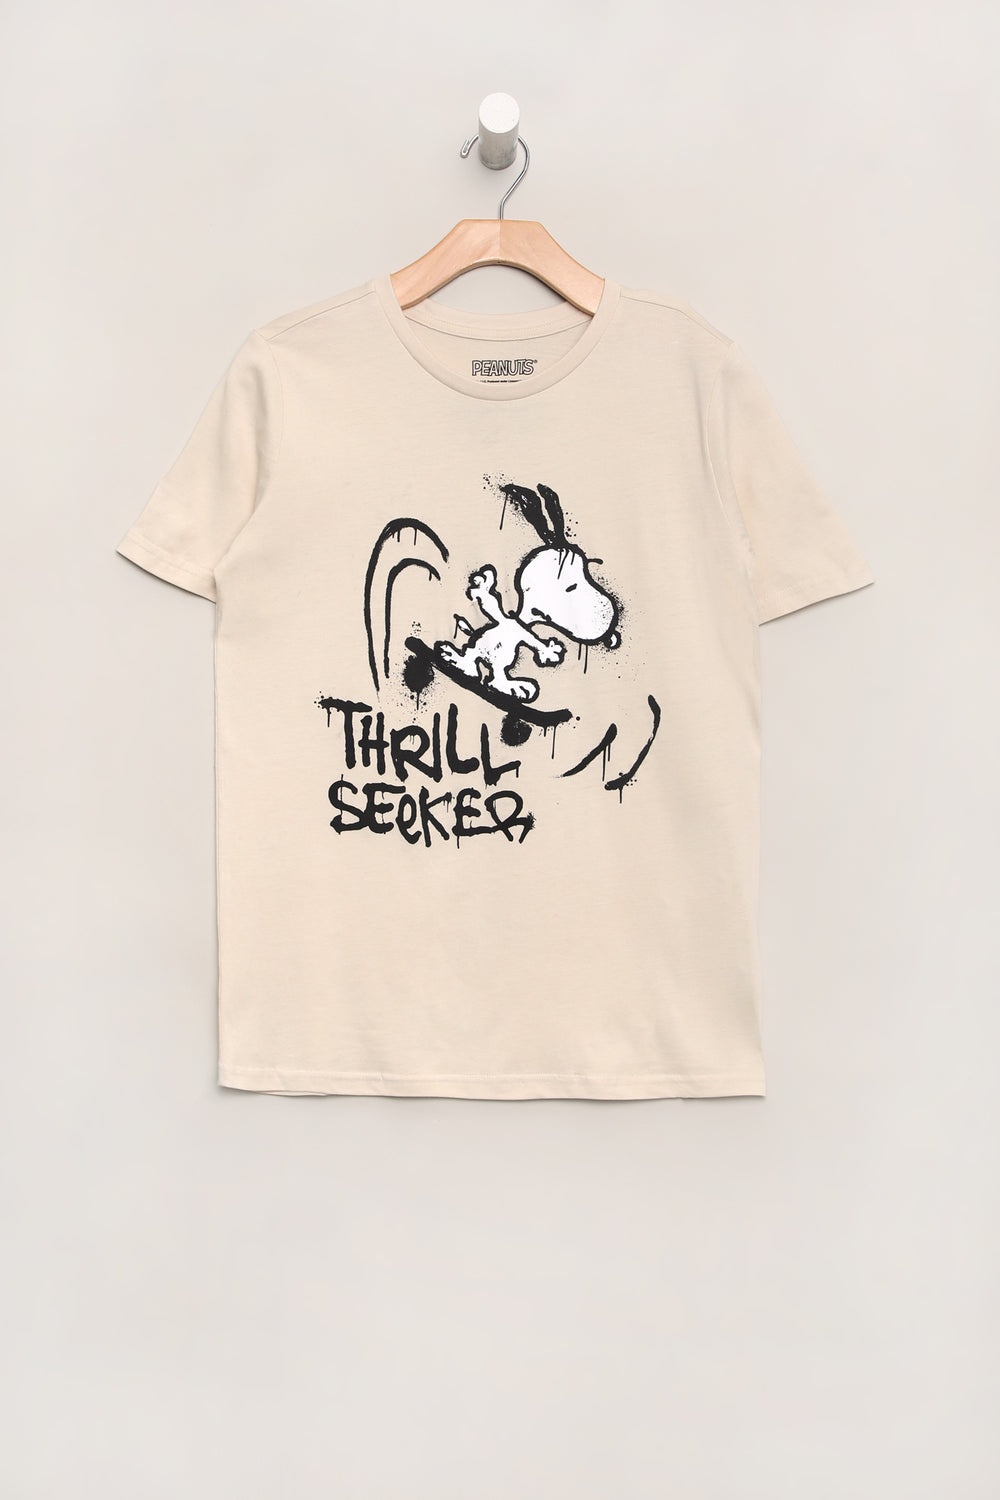 Youth Peanuts Thrill Seeker T-Shirt Youth Peanuts Thrill Seeker T-Shirt